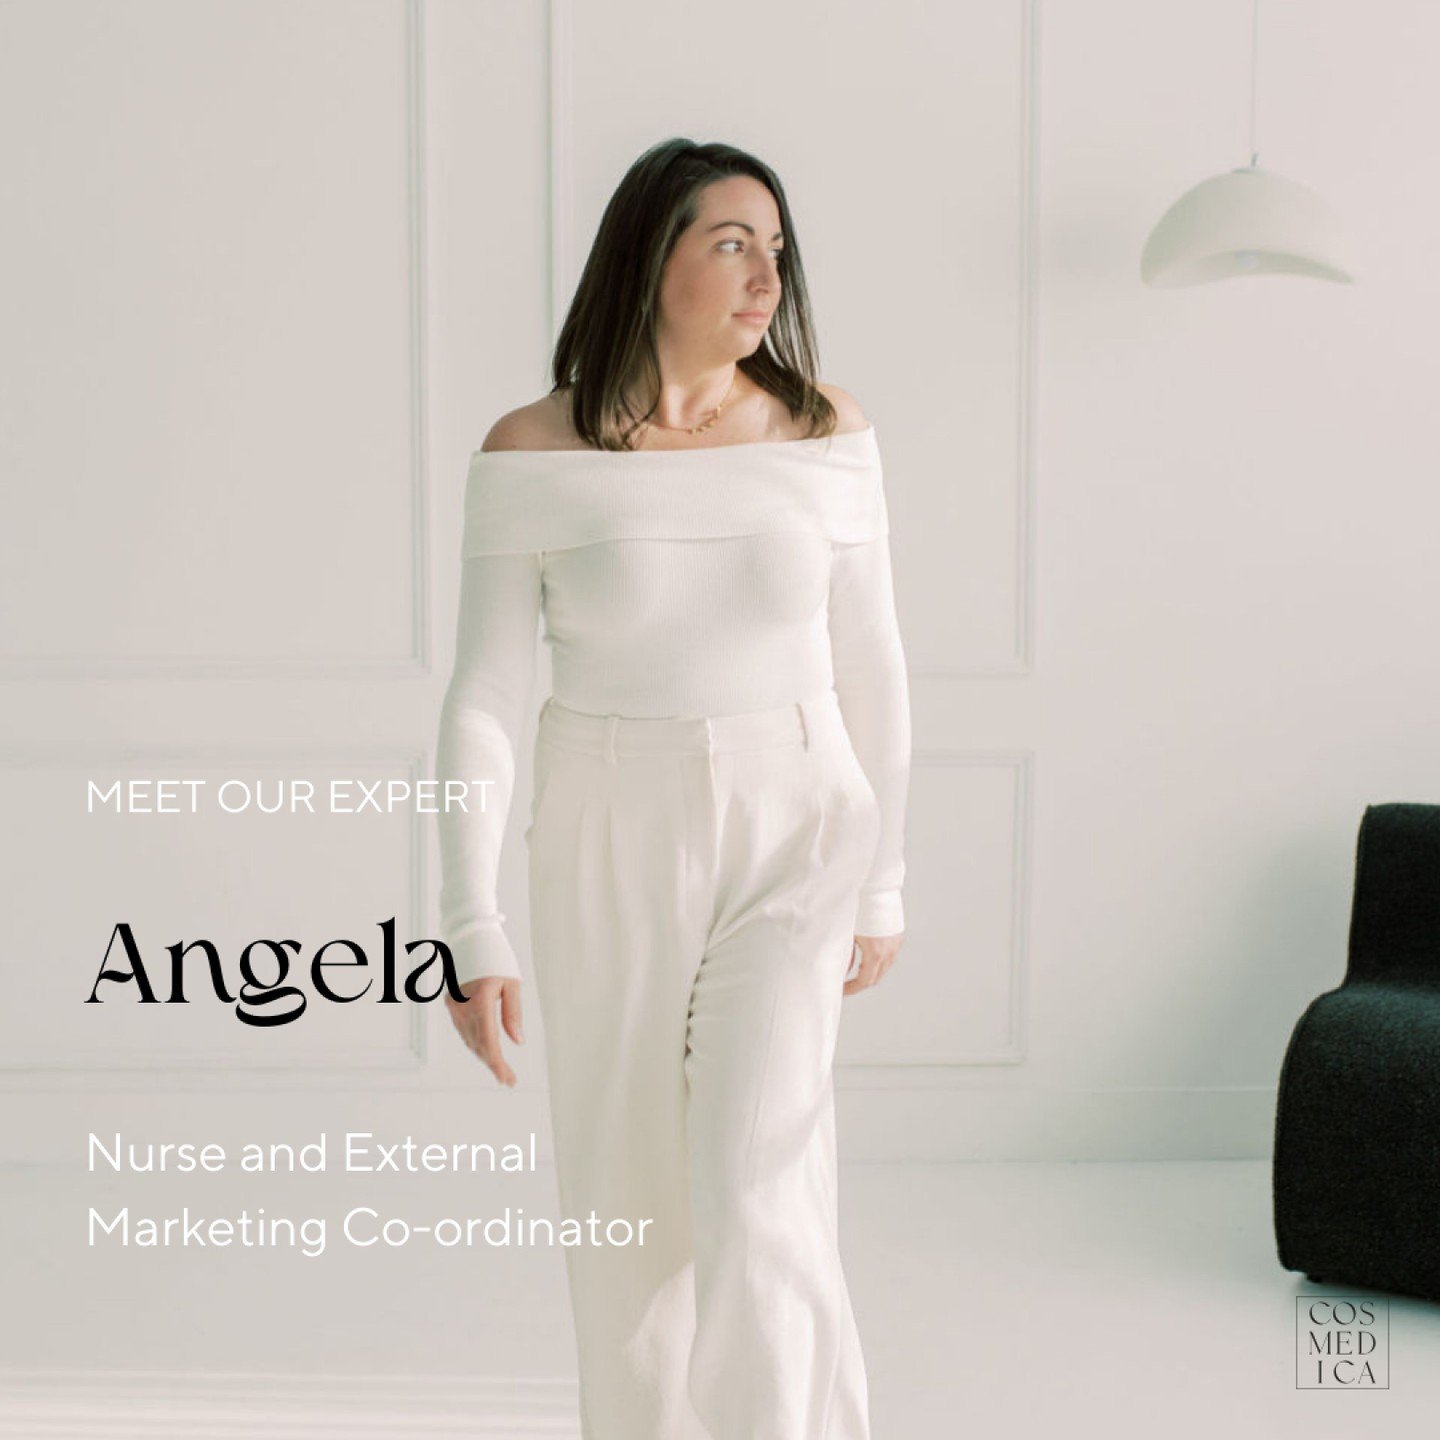 Angela has over 13 years of nursing experience in various areas including emergency, surgical and internal medicine.  She has been professionally recognized for her leadership and teaching roles within the hospital setting.  Angela has spent her enti